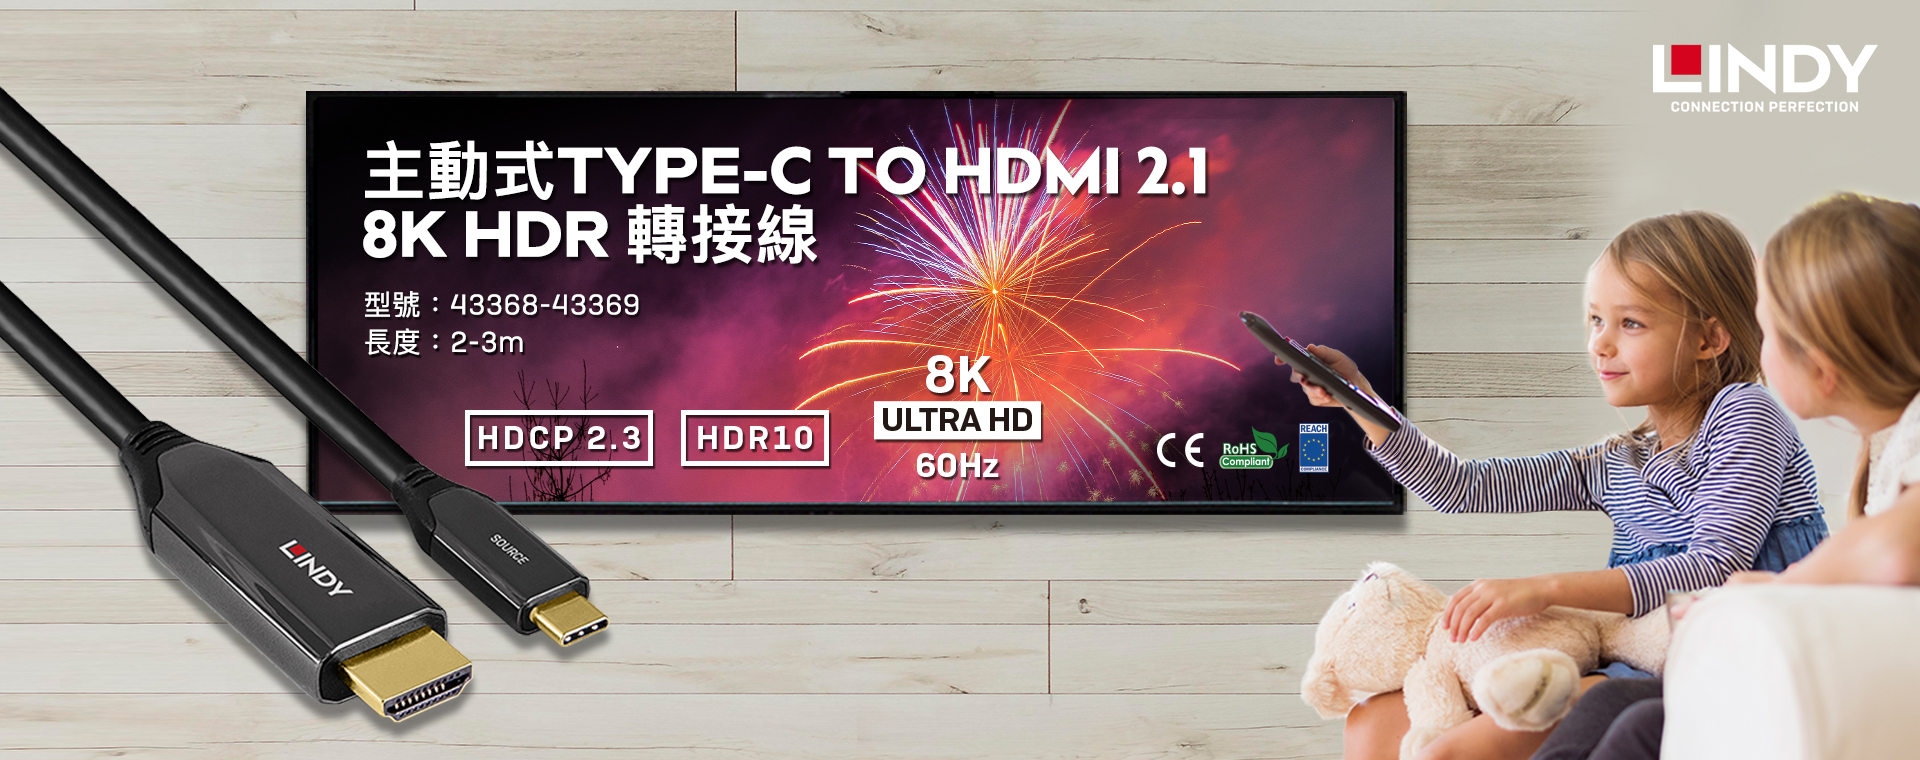 type-c to hdmi